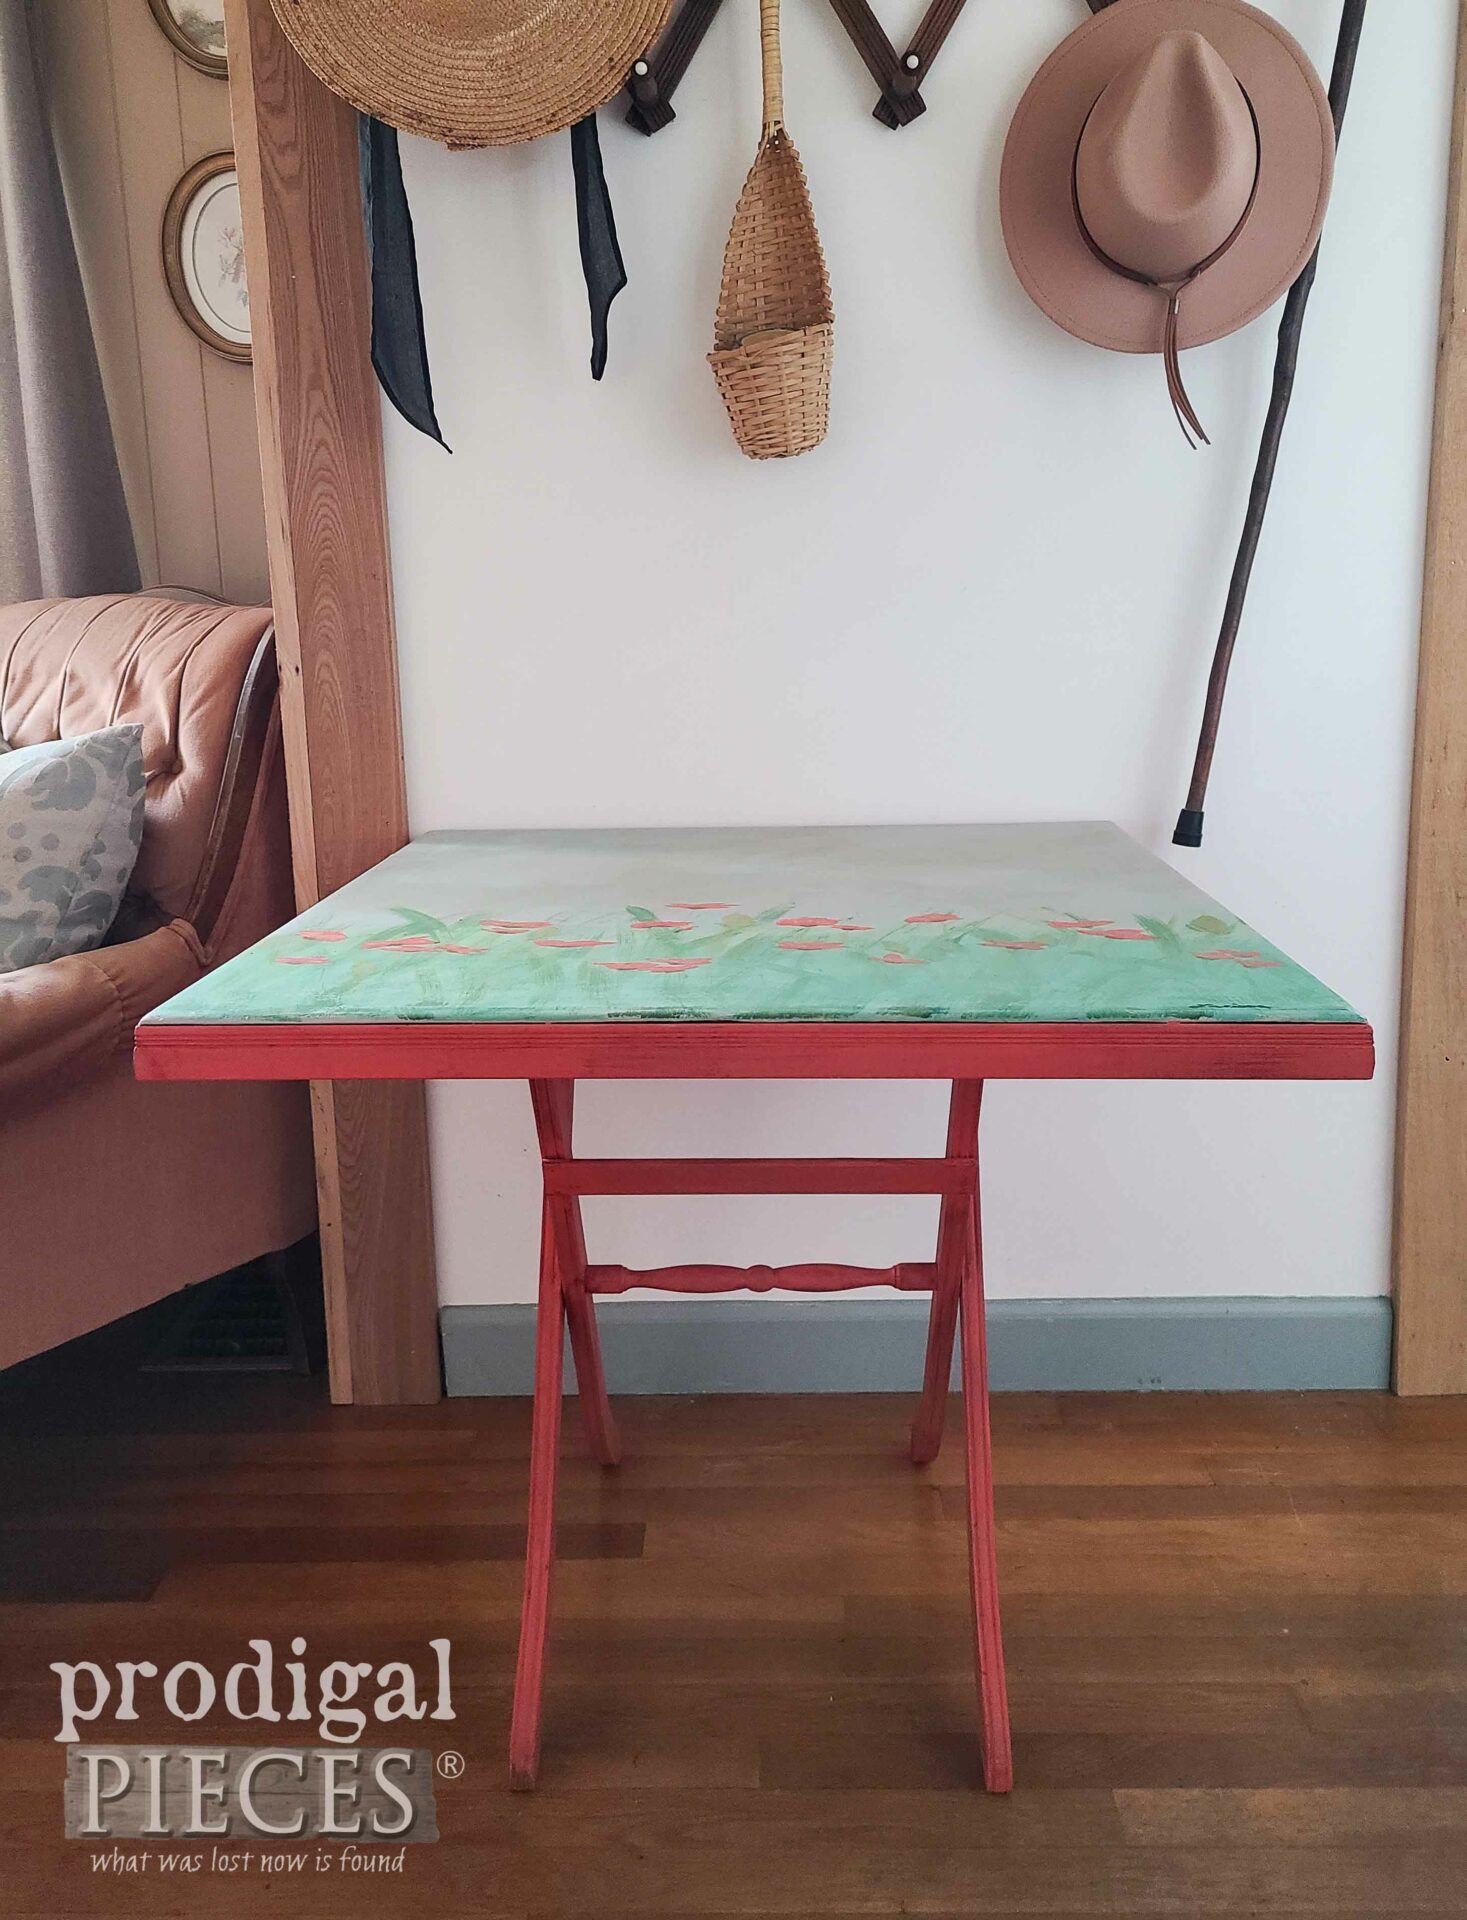 Standing Antique Tilt Top Table Painted by Larissa of Prodigal Pieces | prodigalpieces.com #prodigalpieces #antique #diy #upcycled #furntiure